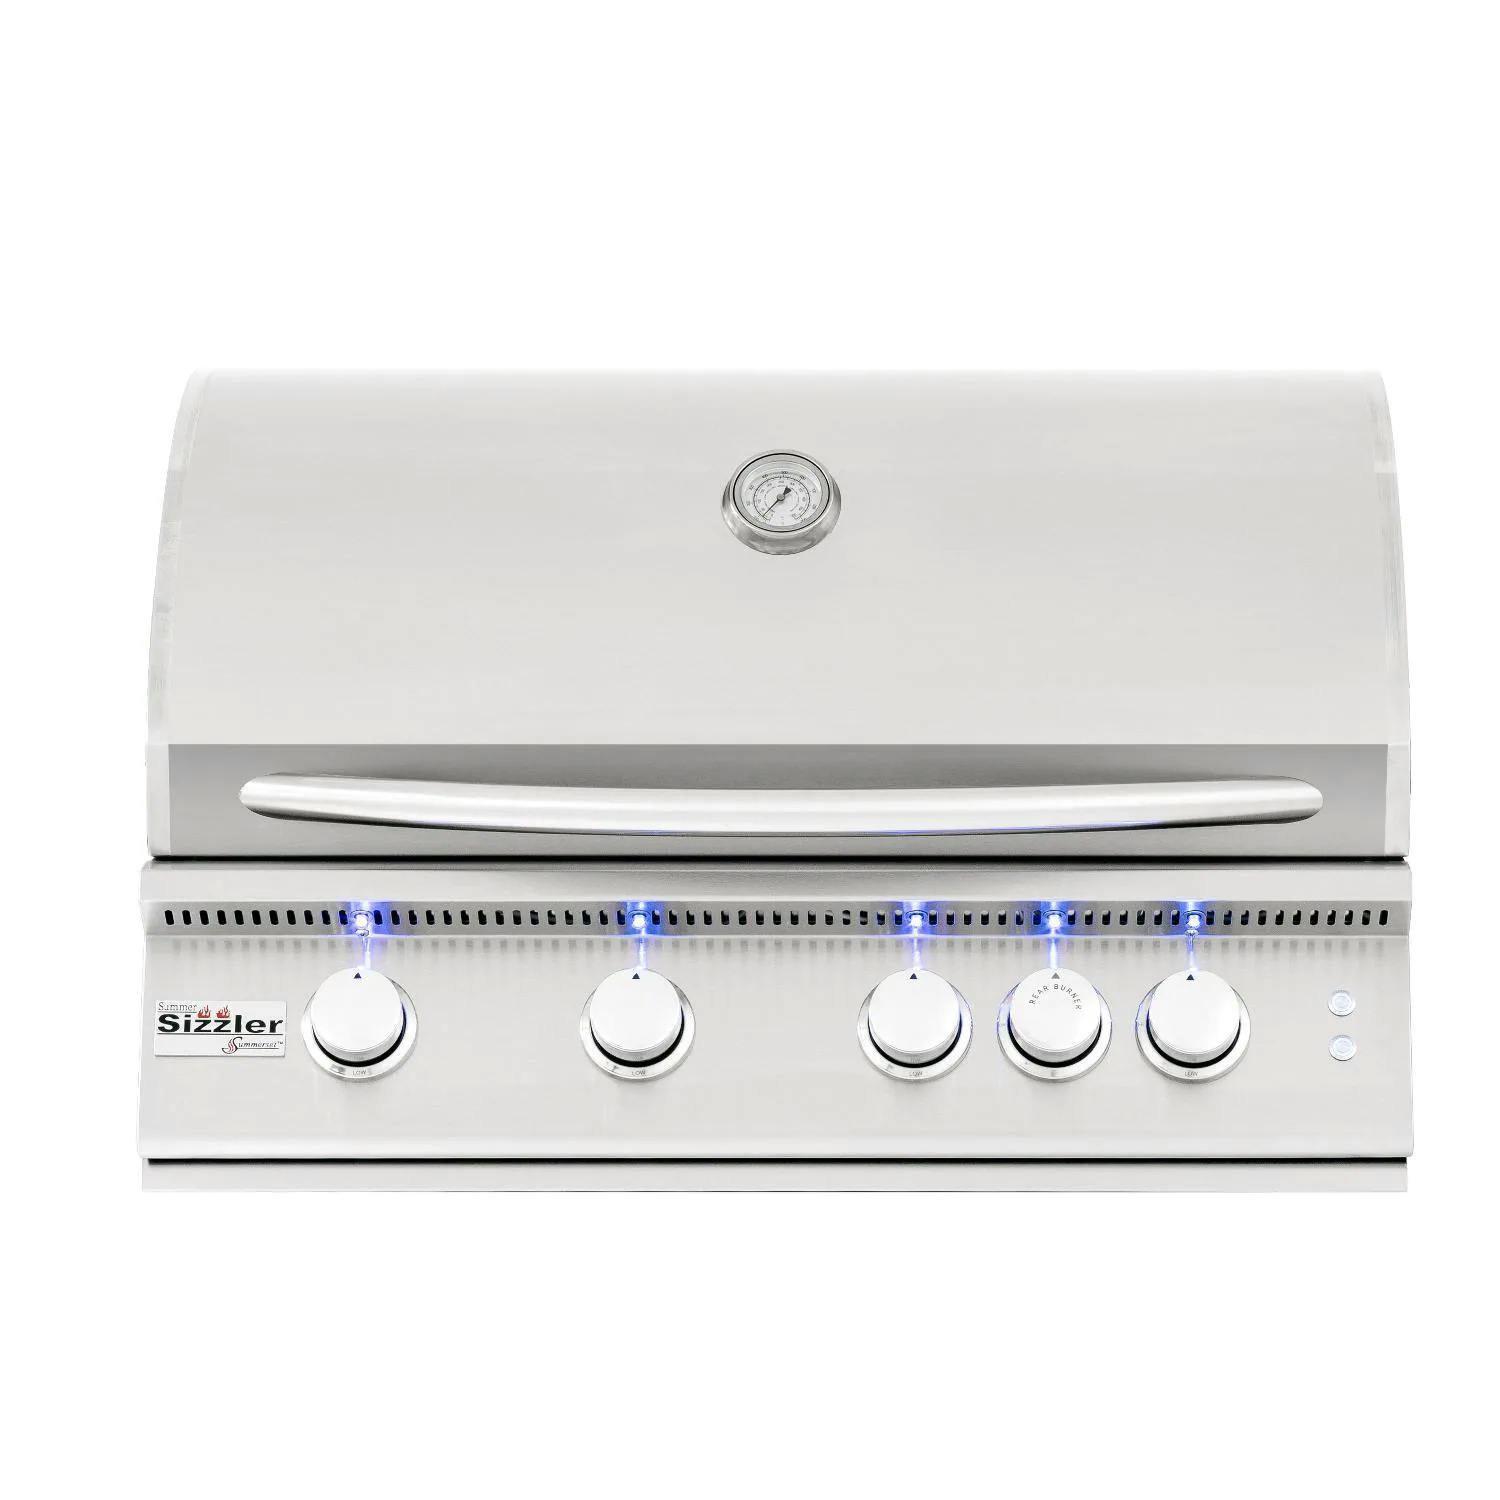 Summerset Sizzler Pro 4-Burner Built-In Gas Grill with Rear Infrared Burner · 32 in. · Natural